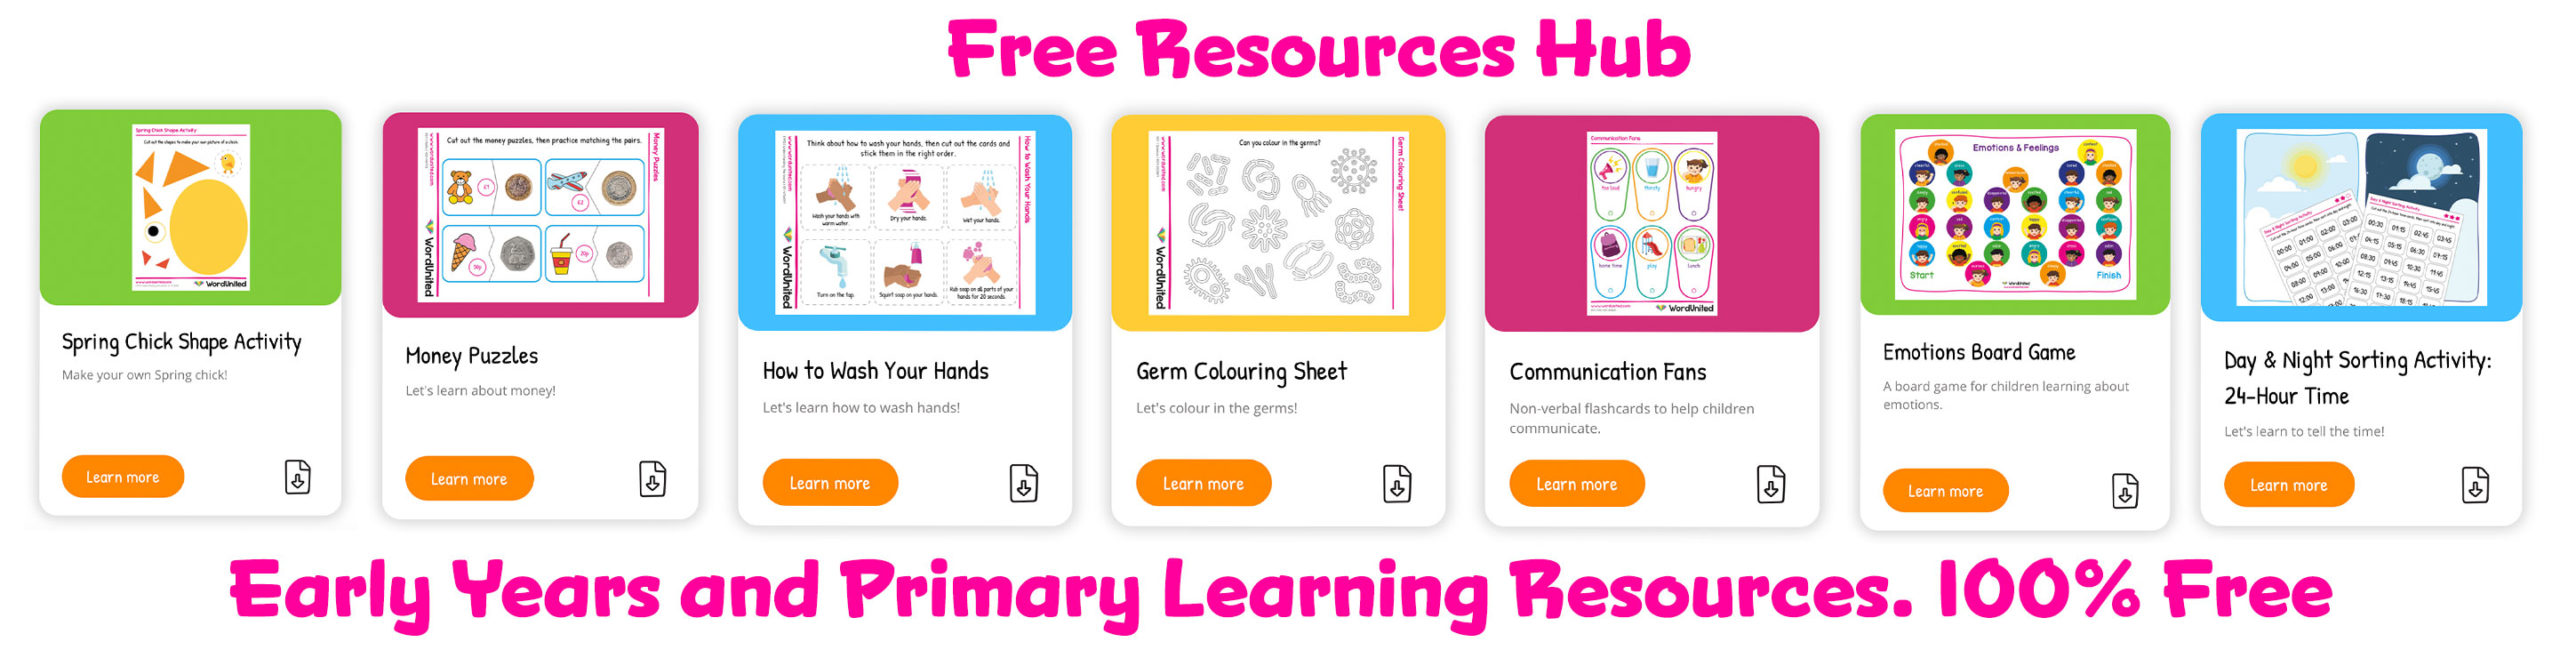 Free Printable Resources and Activities for kids